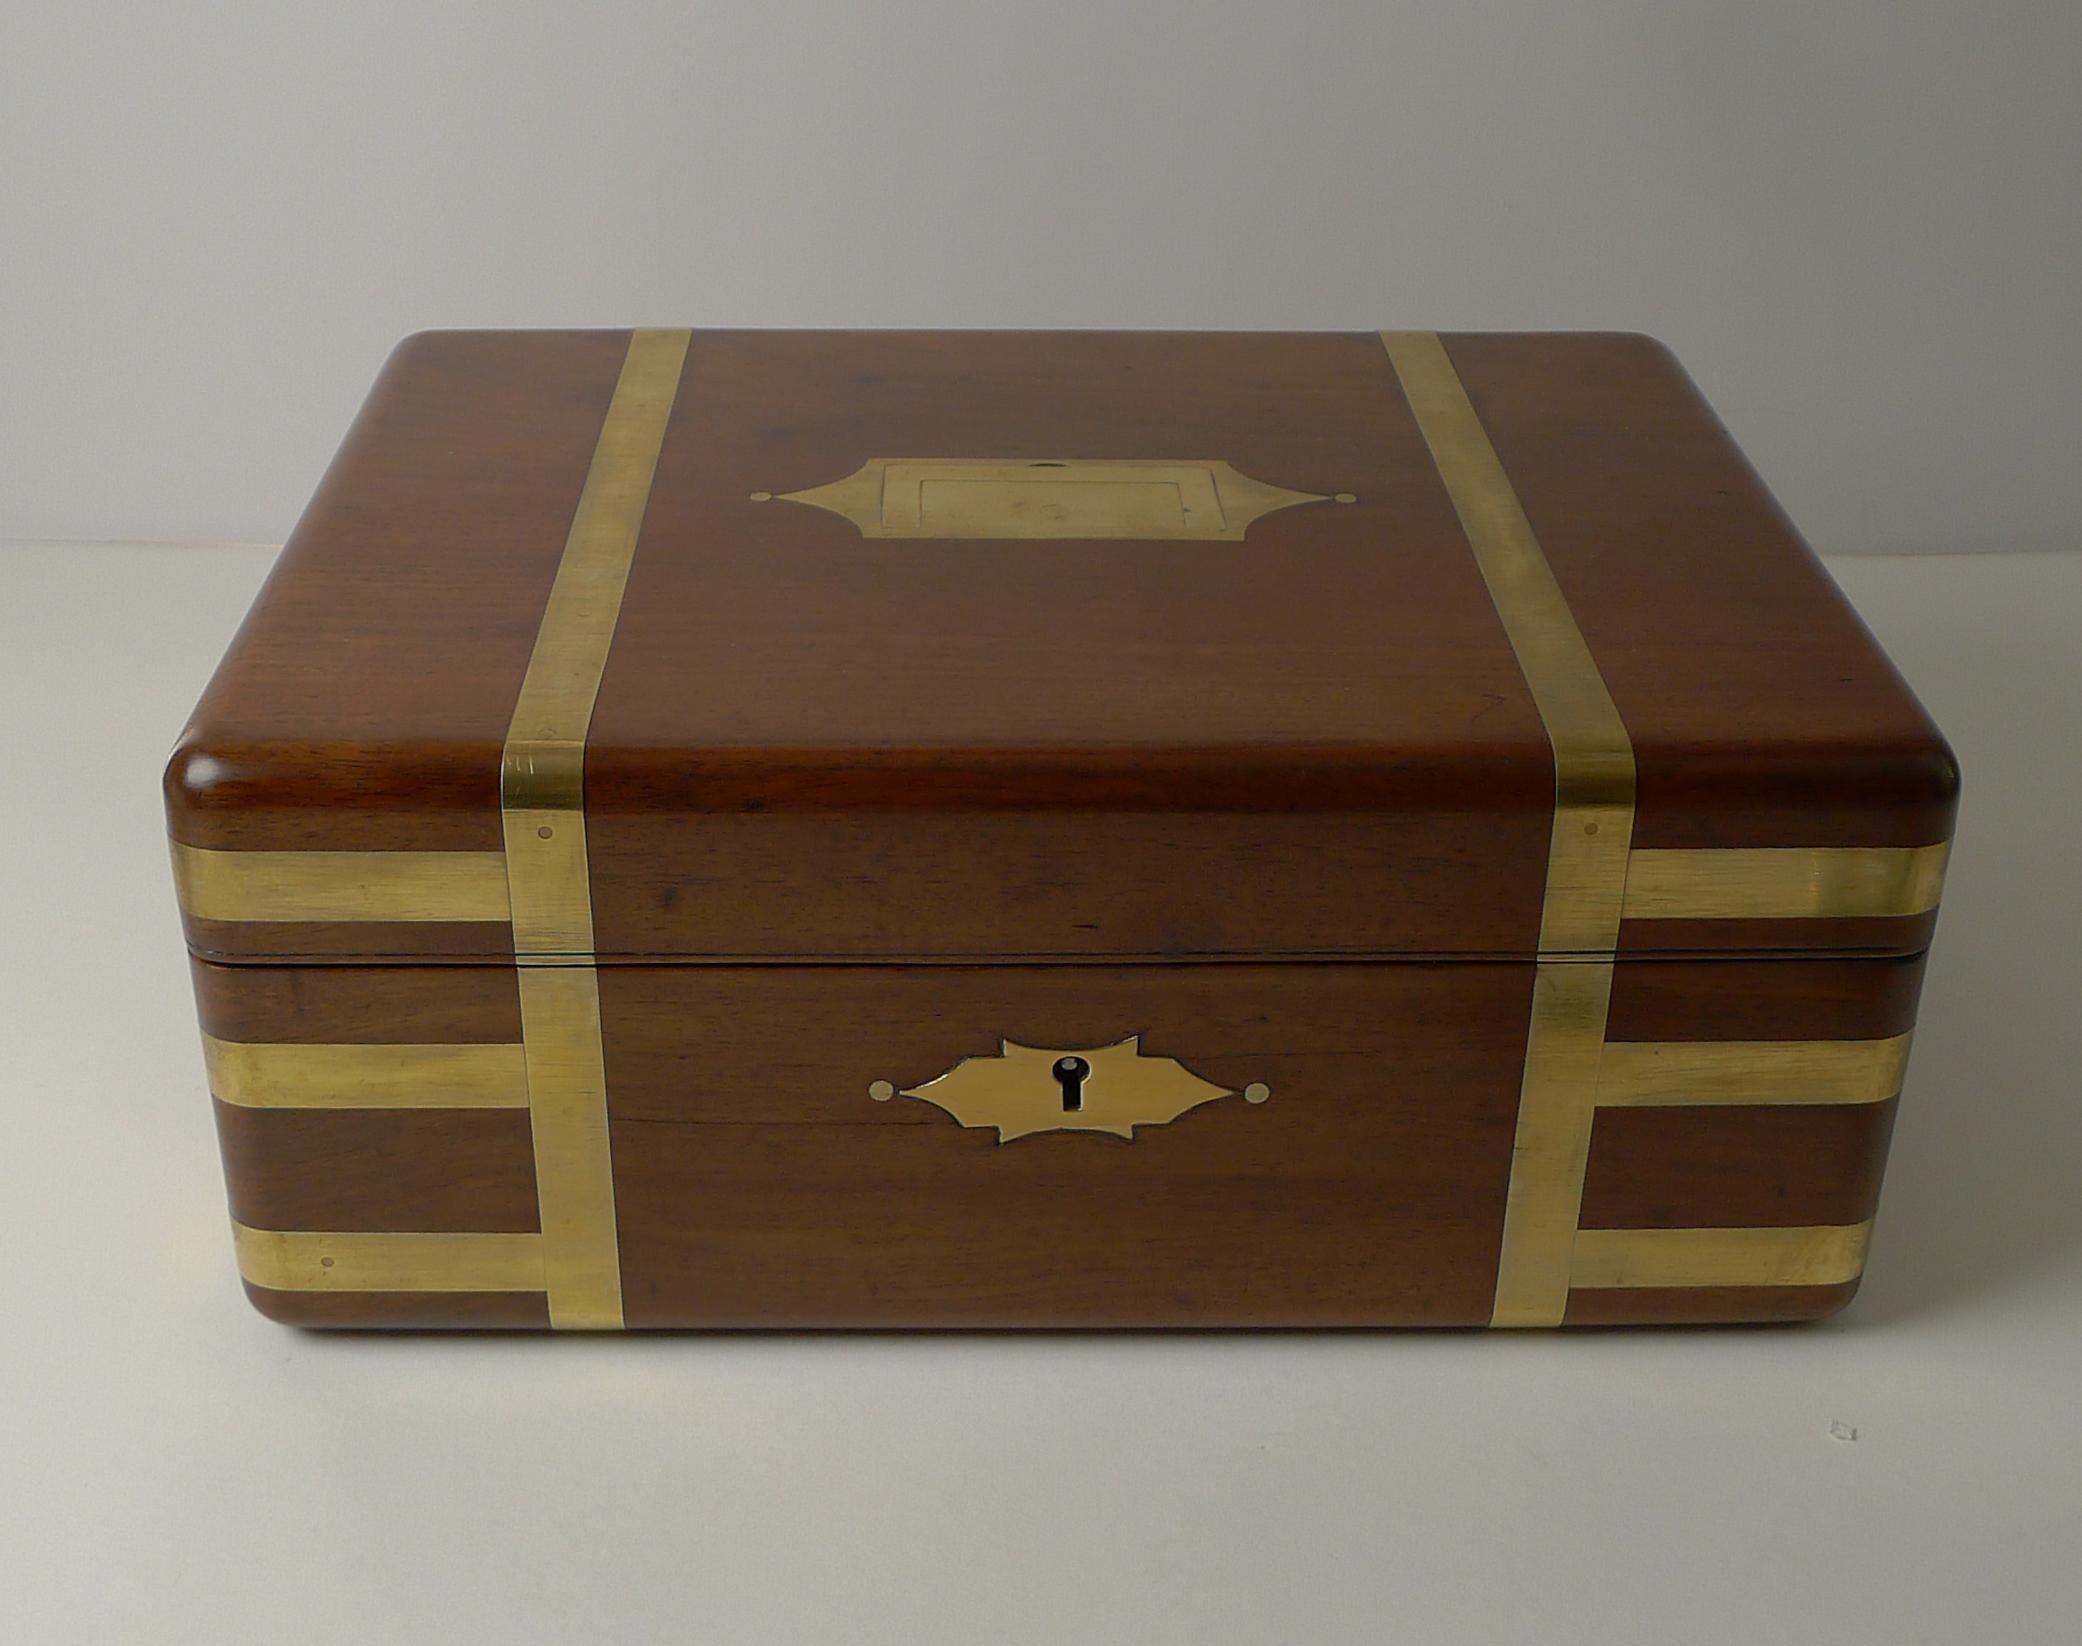 A great early nineteenth century brass bound campaign box made from a very hefty piece of solid wood. This top-notch example box is beautifully brass bound and has a flush inlaid brass military style handle to the top.

The box is beautifully